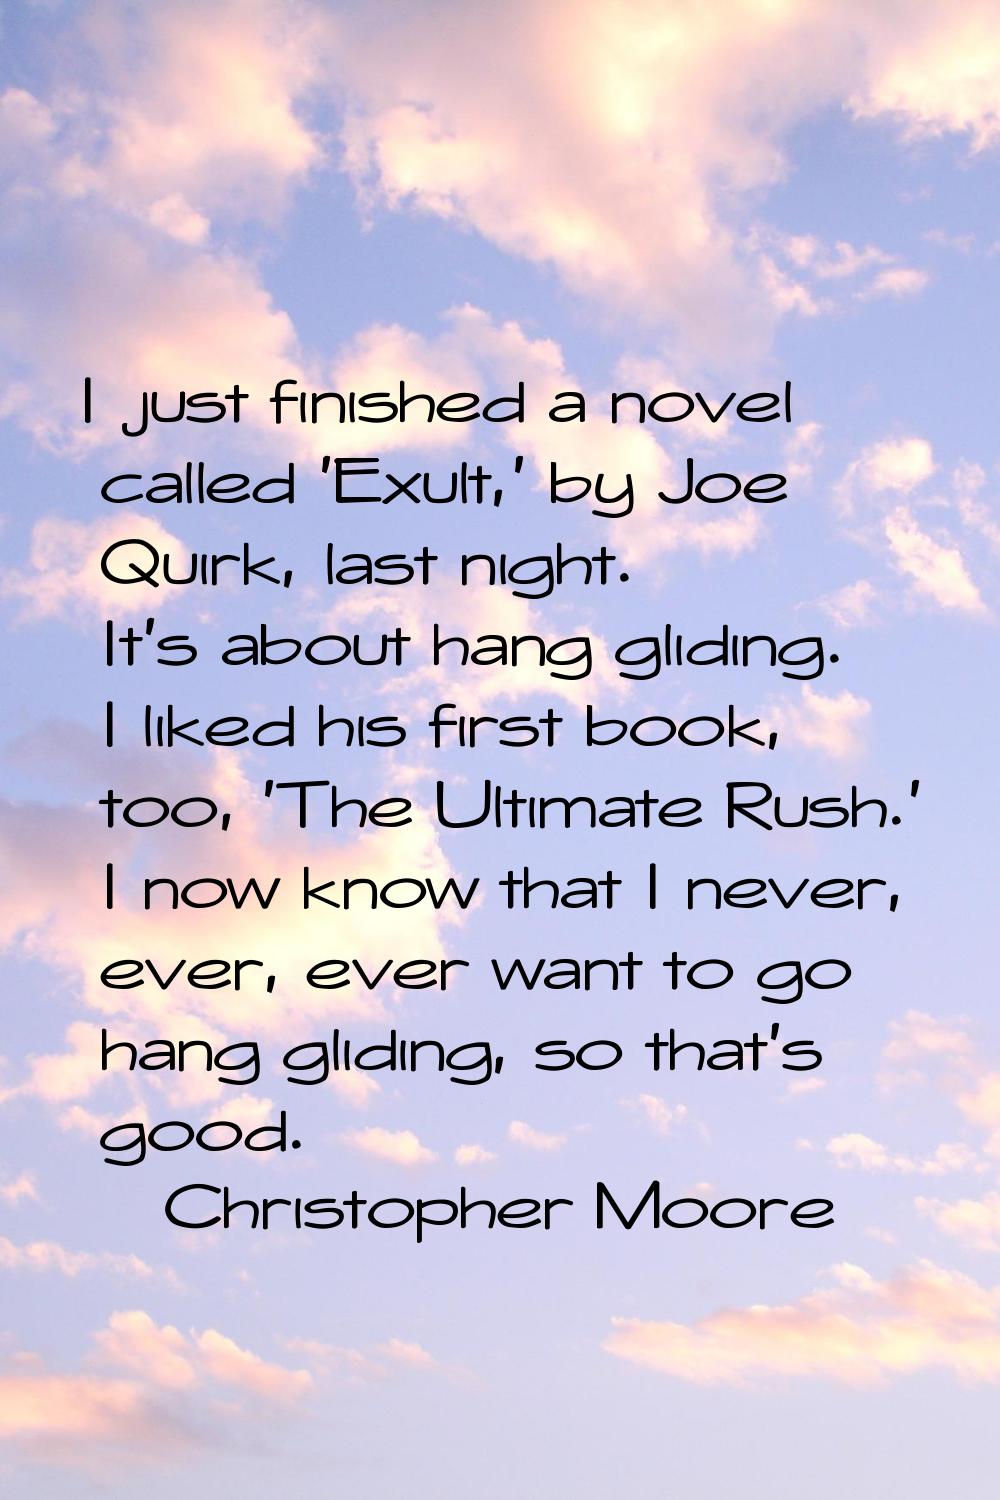 I just finished a novel called 'Exult,' by Joe Quirk, last night. It's about hang gliding. I liked 